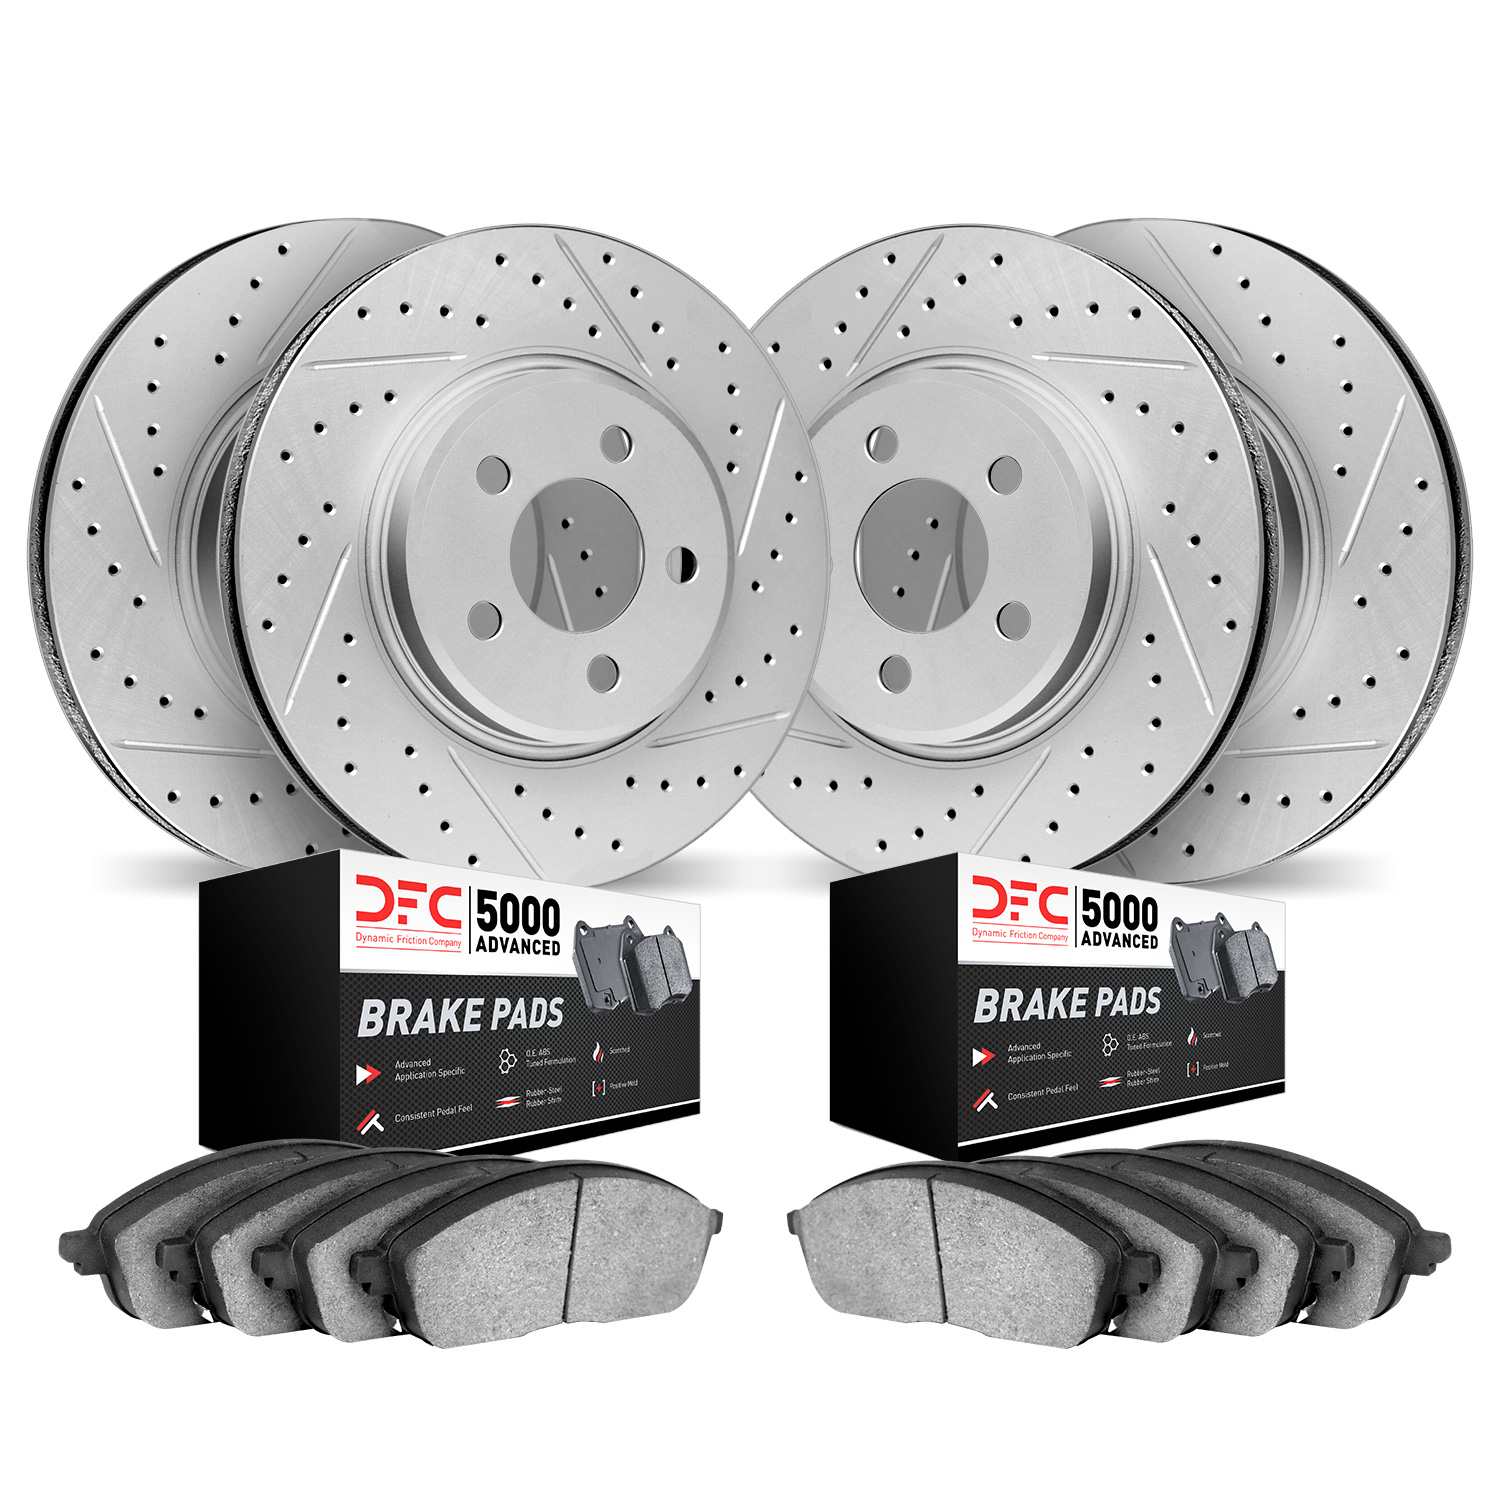 2504-54196 Geoperformance Drilled/Slotted Rotors w/5000 Advanced Brake Pads Kit, 2003-2005 Jaguar, Position: Front and Rear